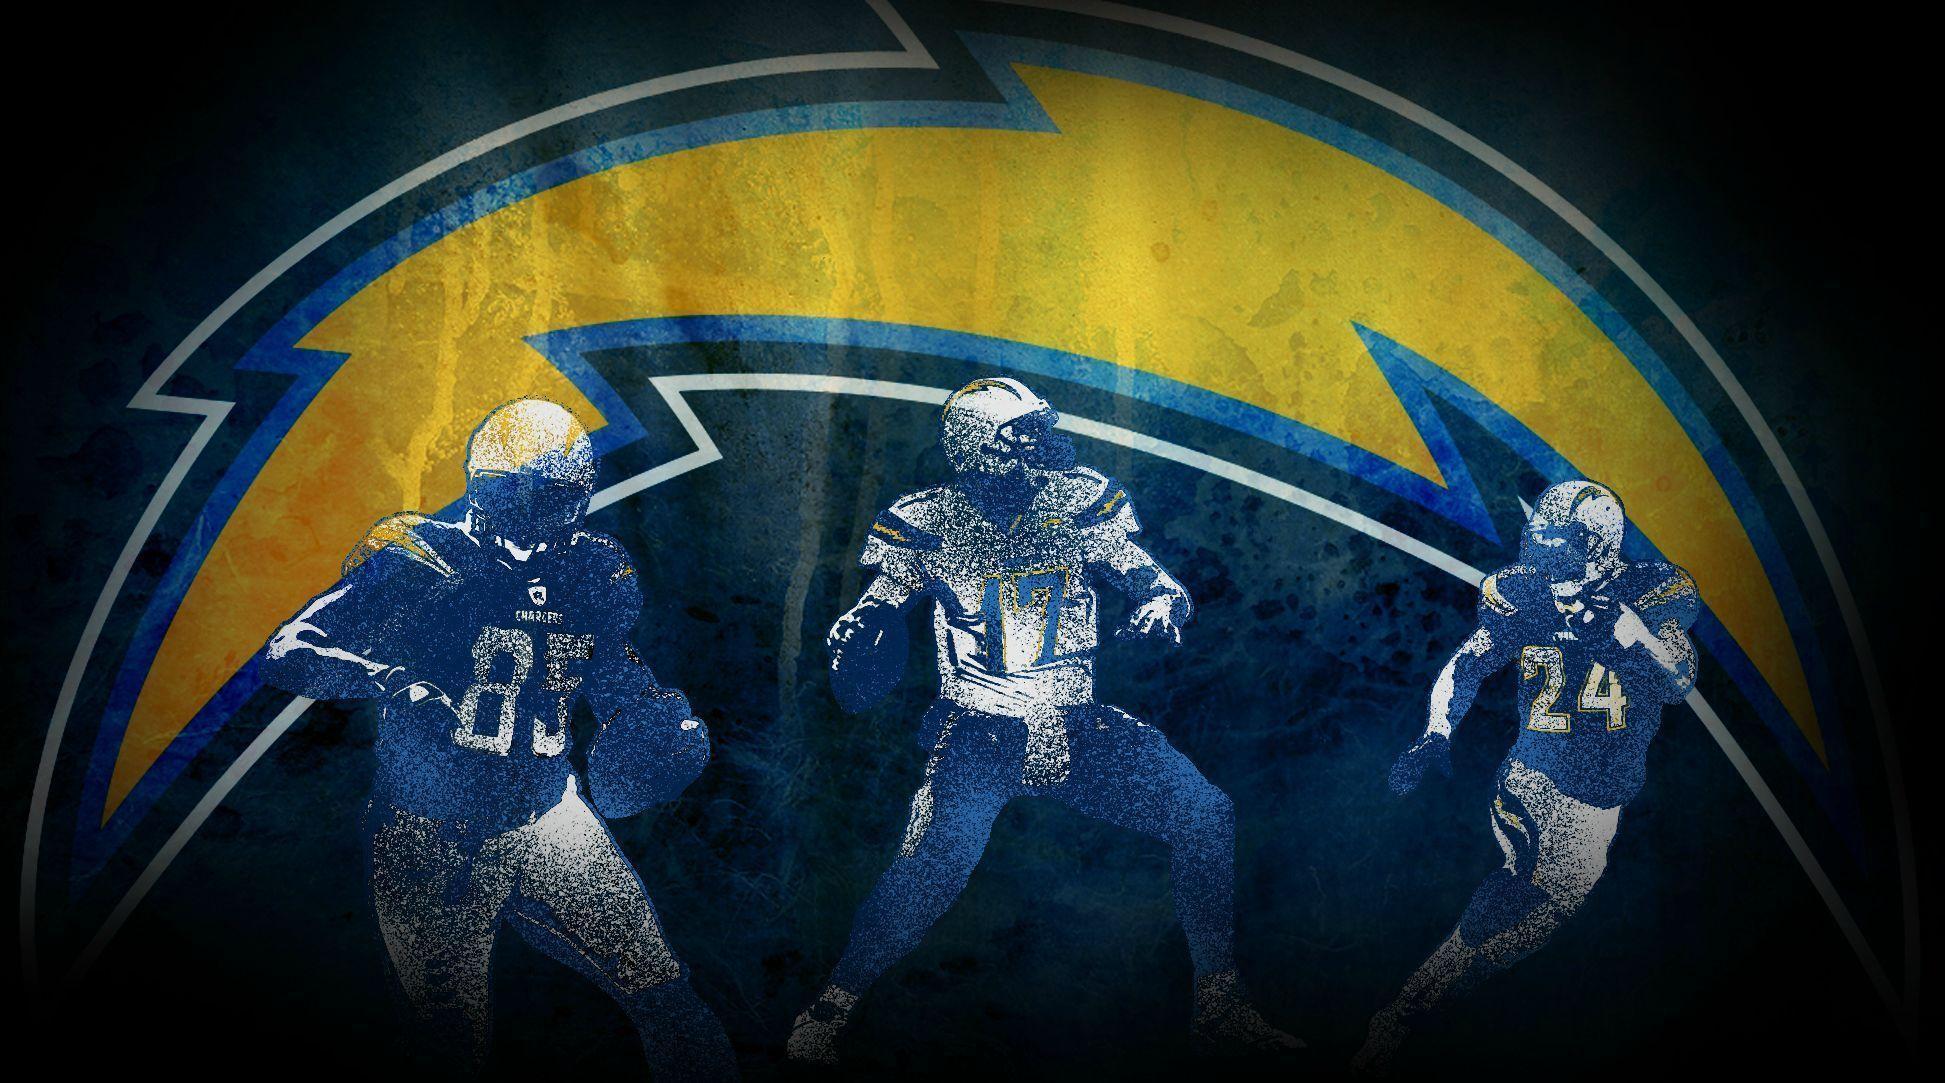 San Diego Chargers Wallpapers